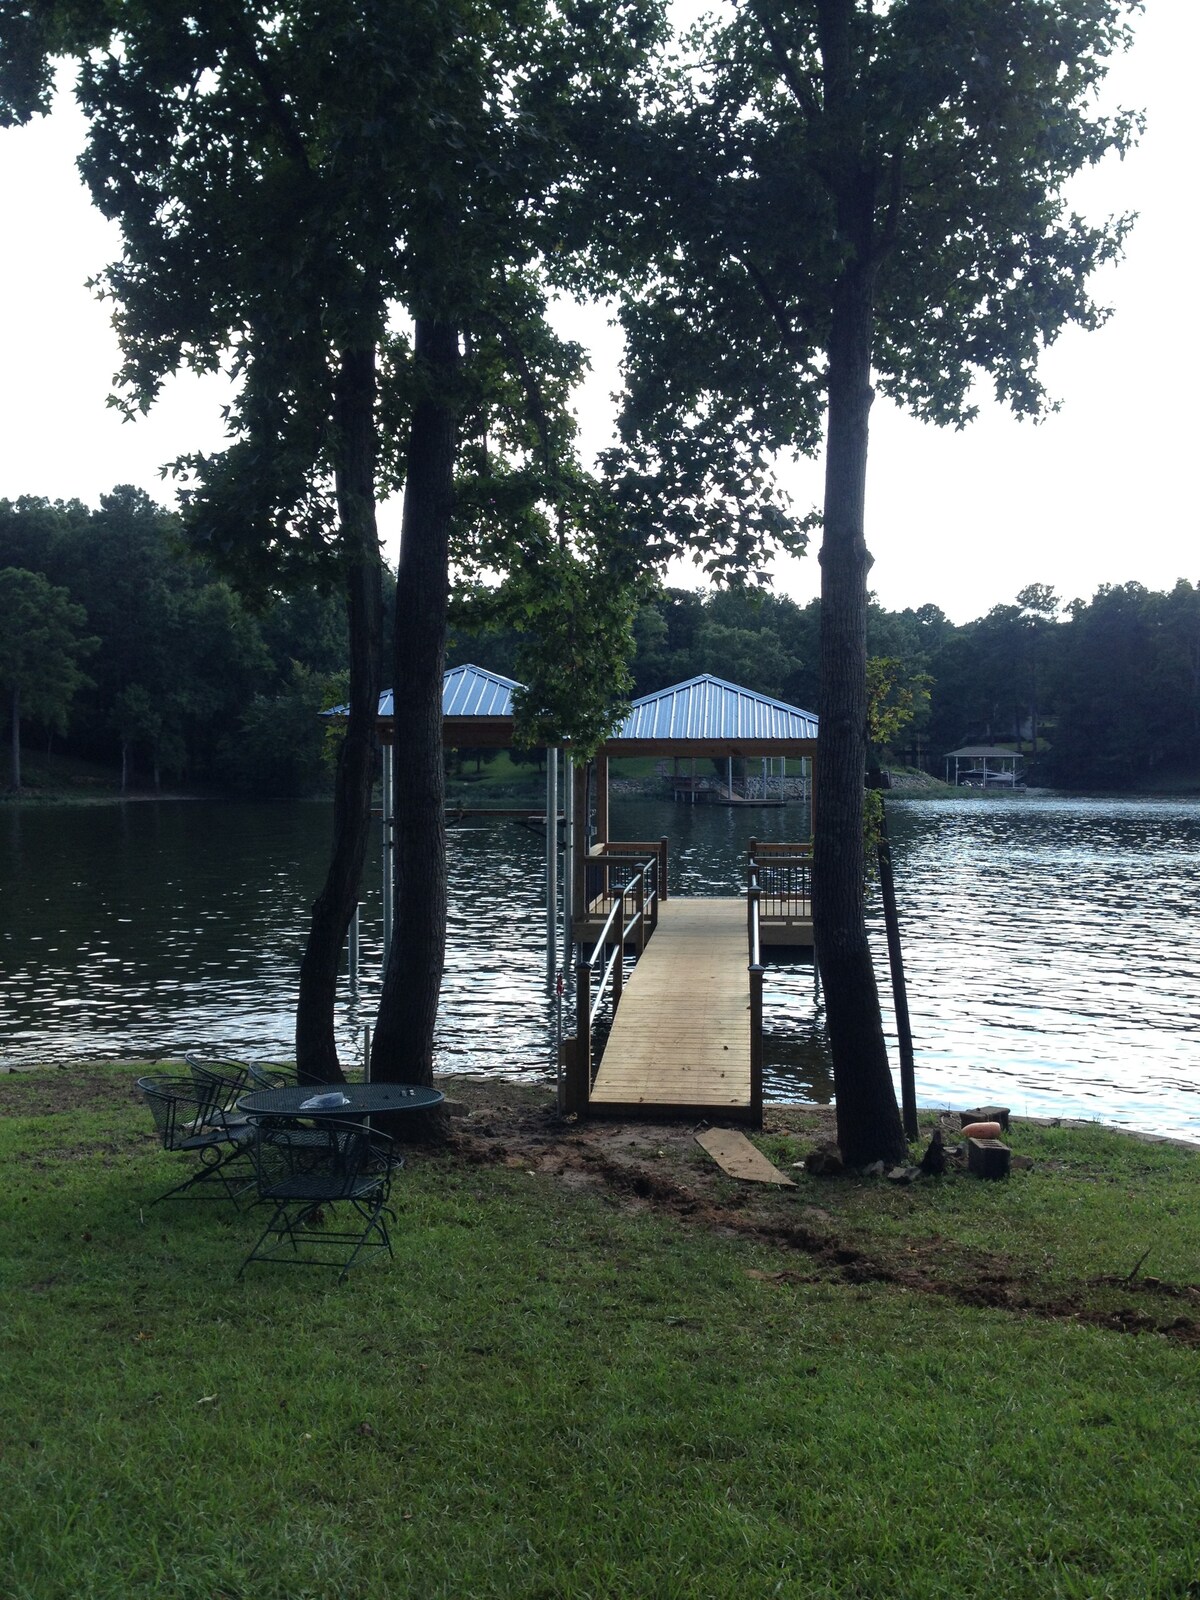 Home away from home!  Relaxing lake getaway....